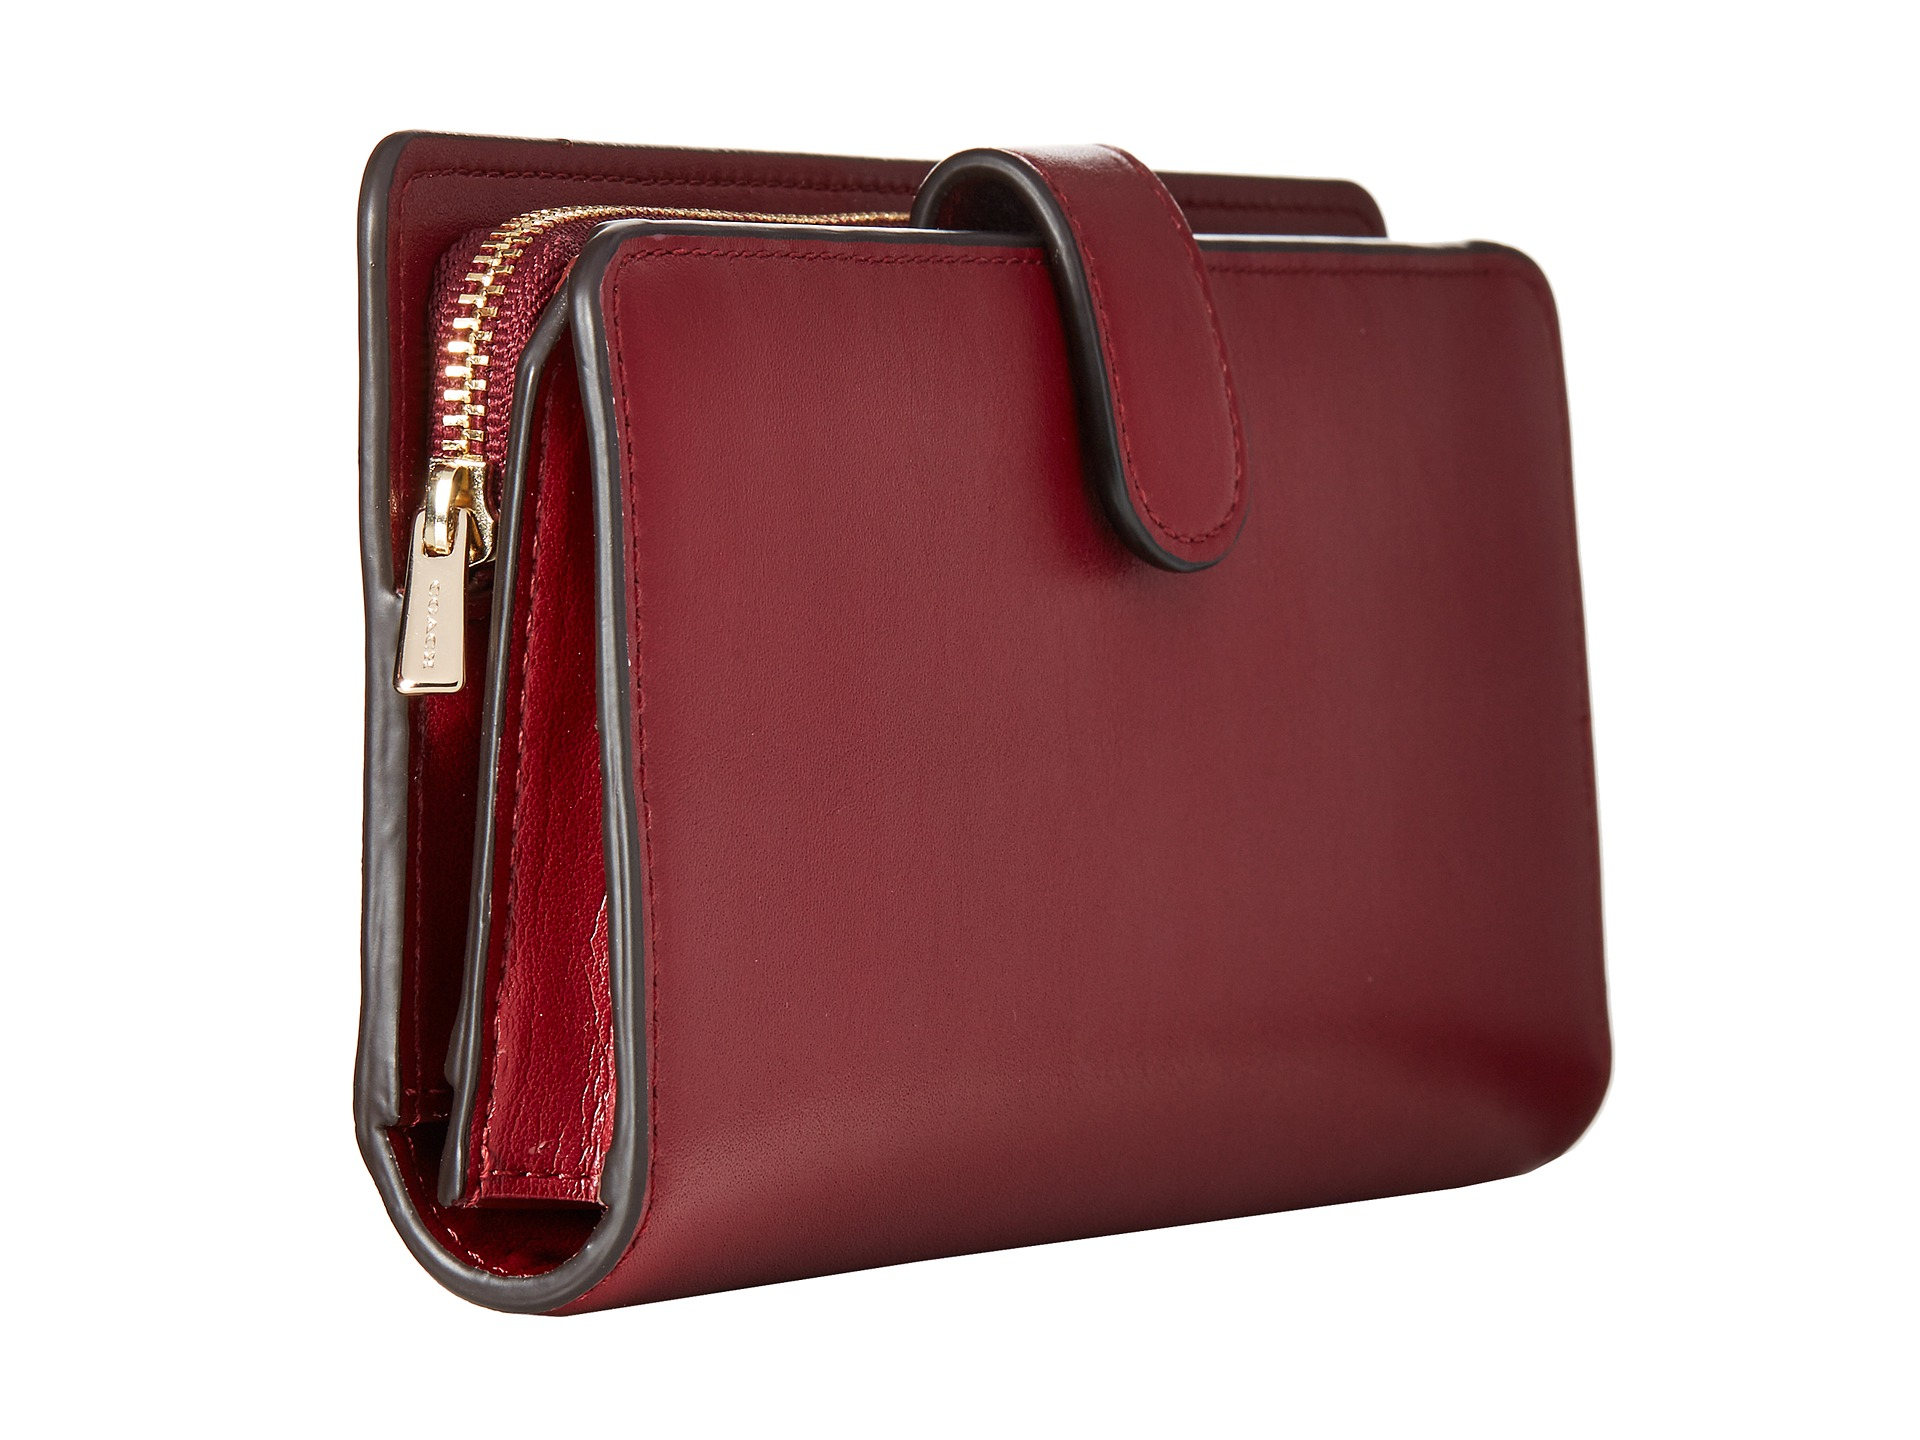 Lyst - Coach Madison Leather Skinny Wallet in Red